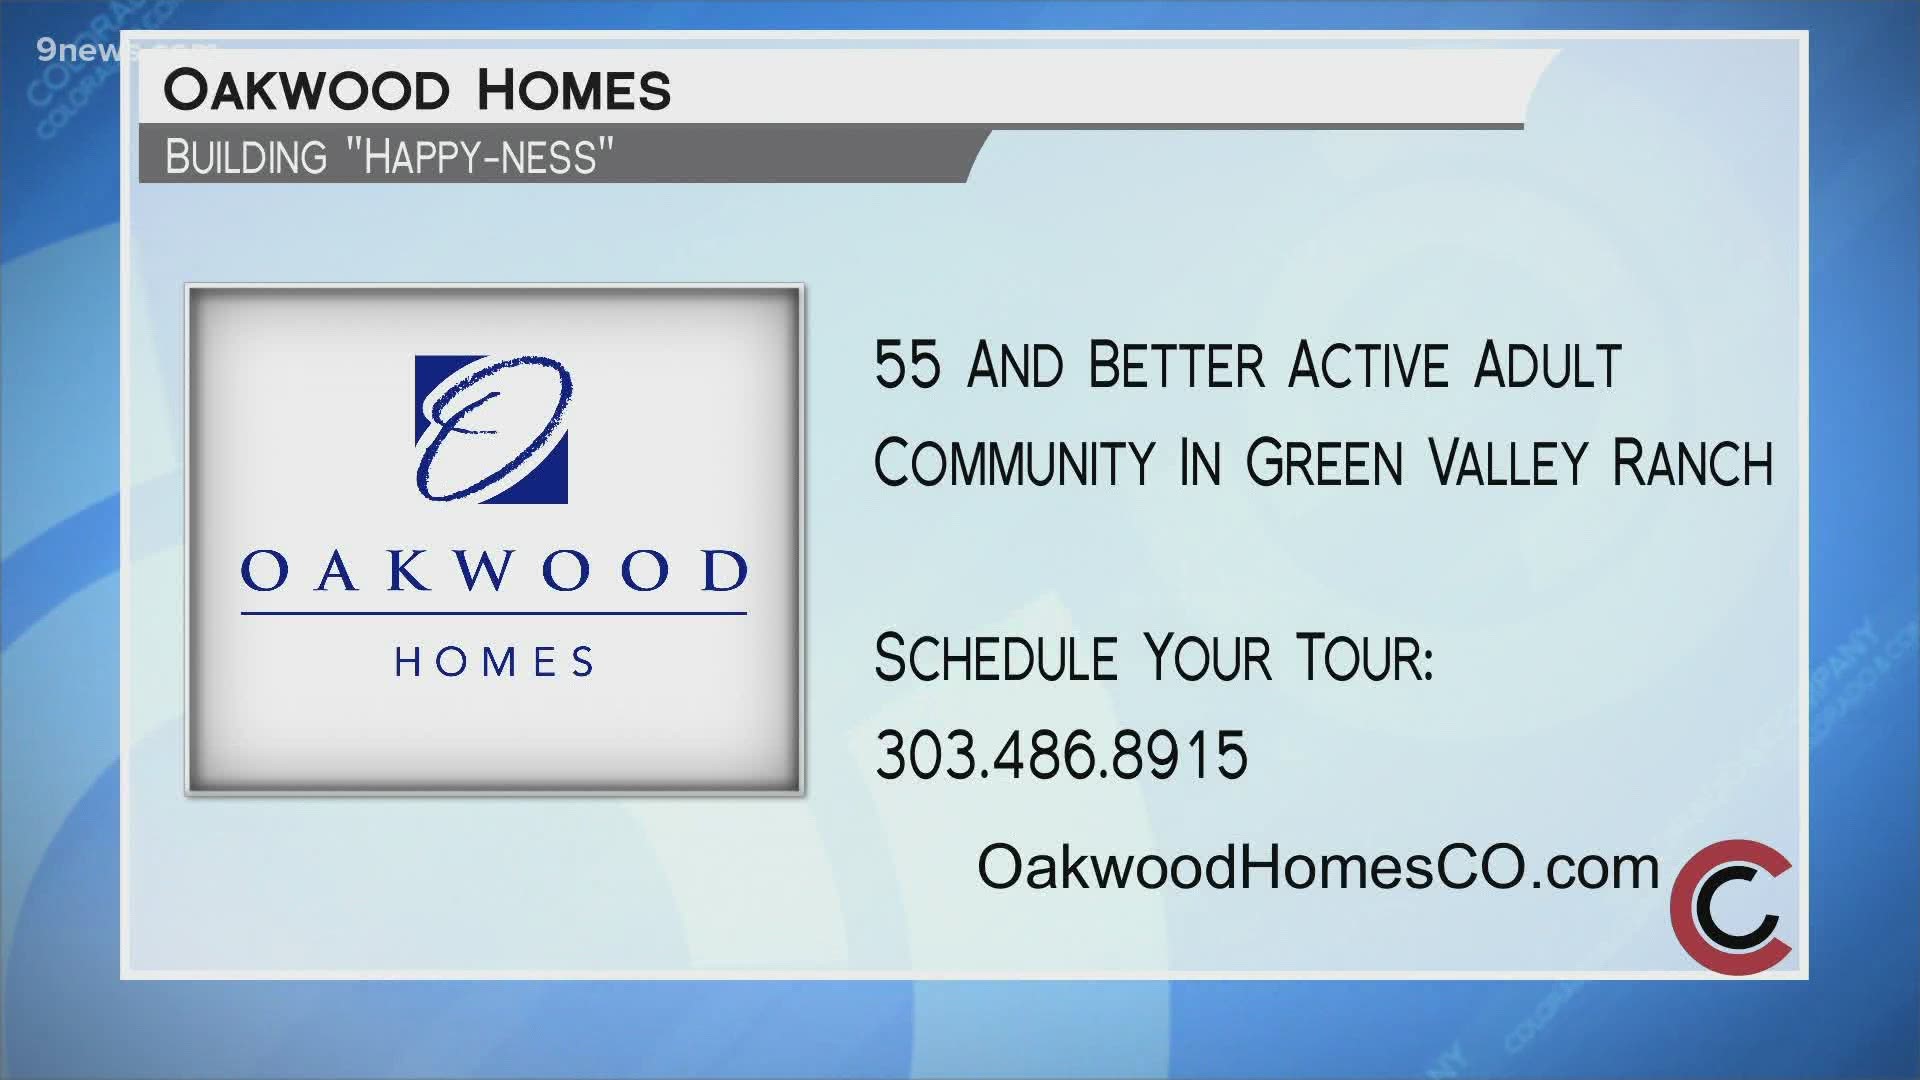 Check out exciting floor plans and amenities at OakwoodHomesCO.com. While you're there, schedule a tour of one of the amazing Green Valley Ranch properties.